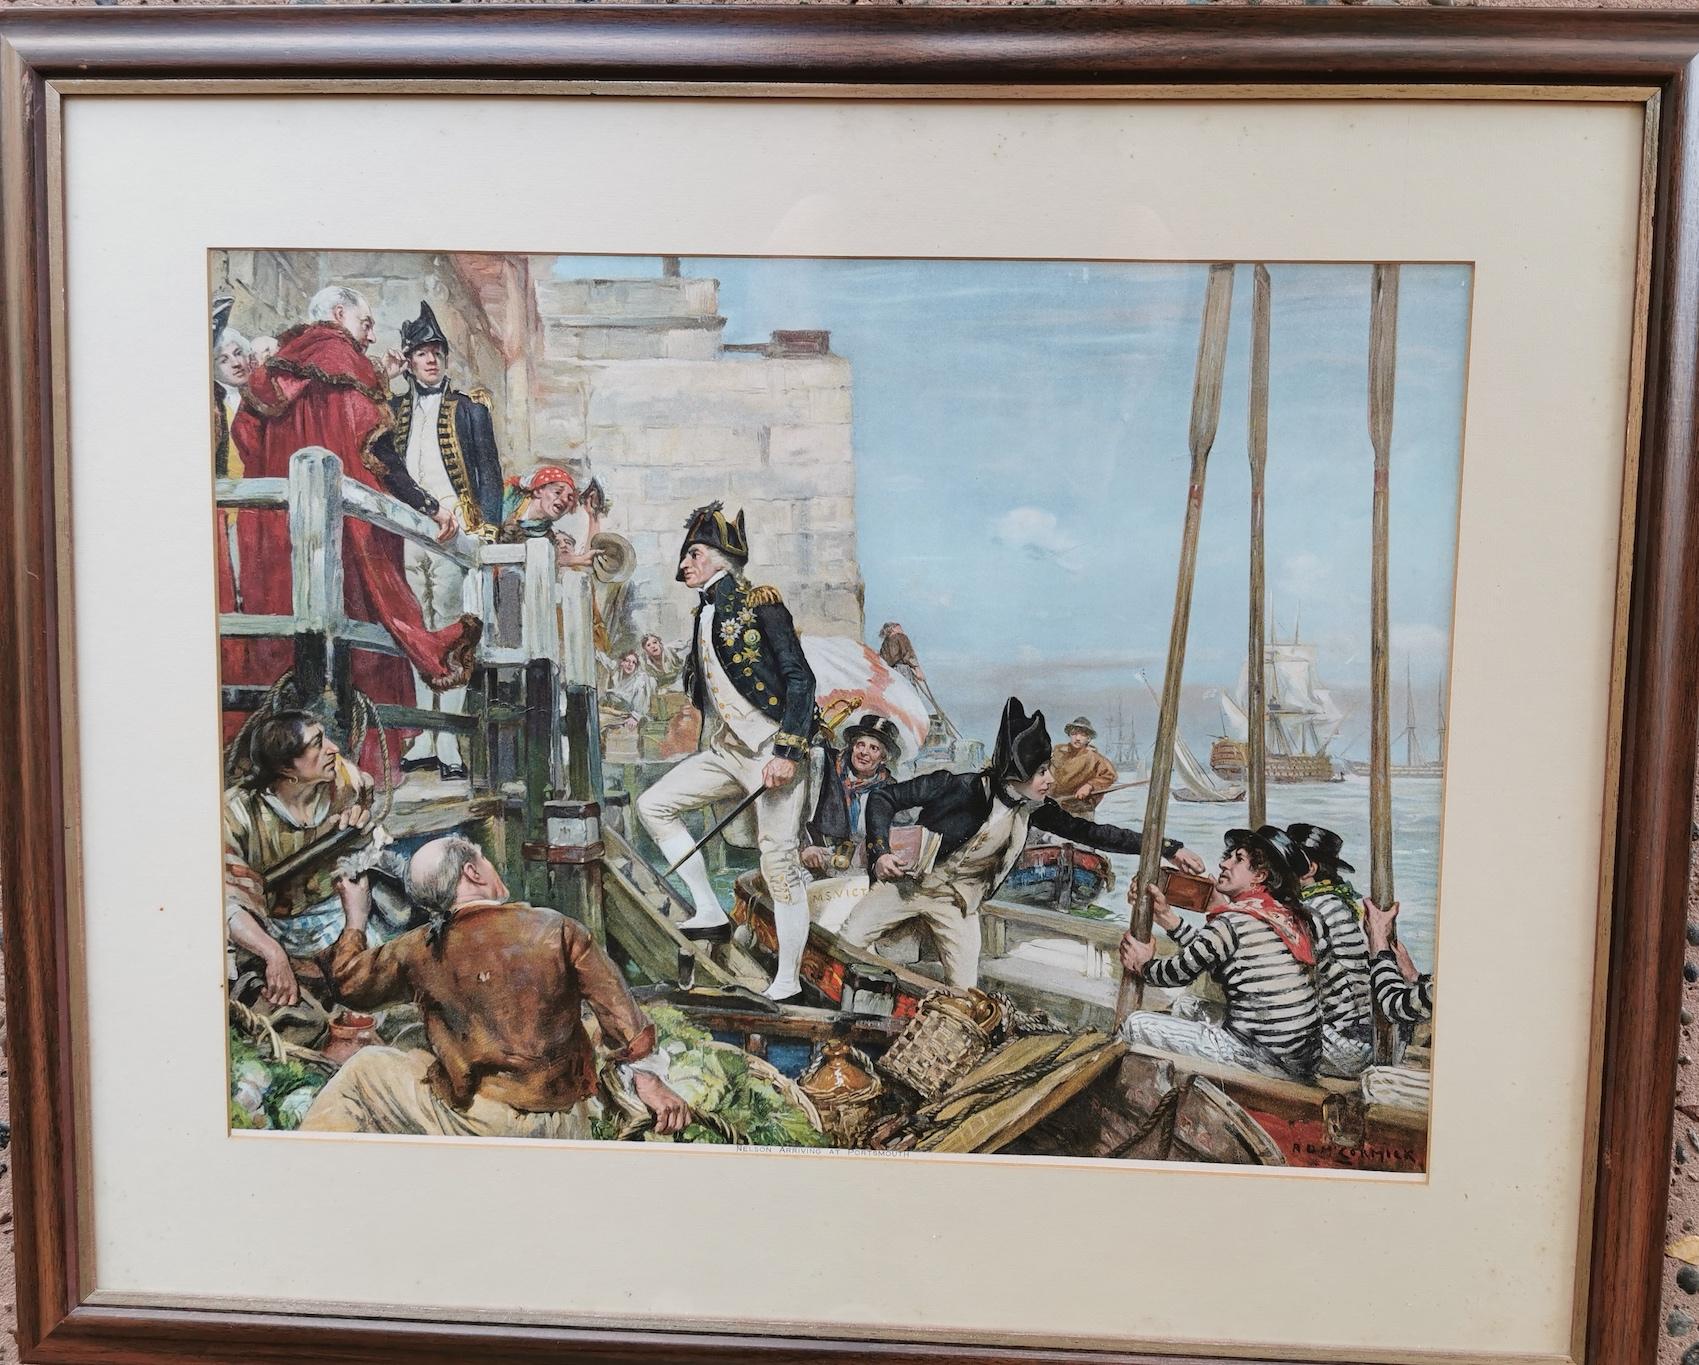 (Lord) Nelson arriving at Portsmouth (from Spithead),
After Arthur David McCormick (1860–1943),
framed color print,
Measures: Image 59 x 42cm high, frame 81 x 67cm high.